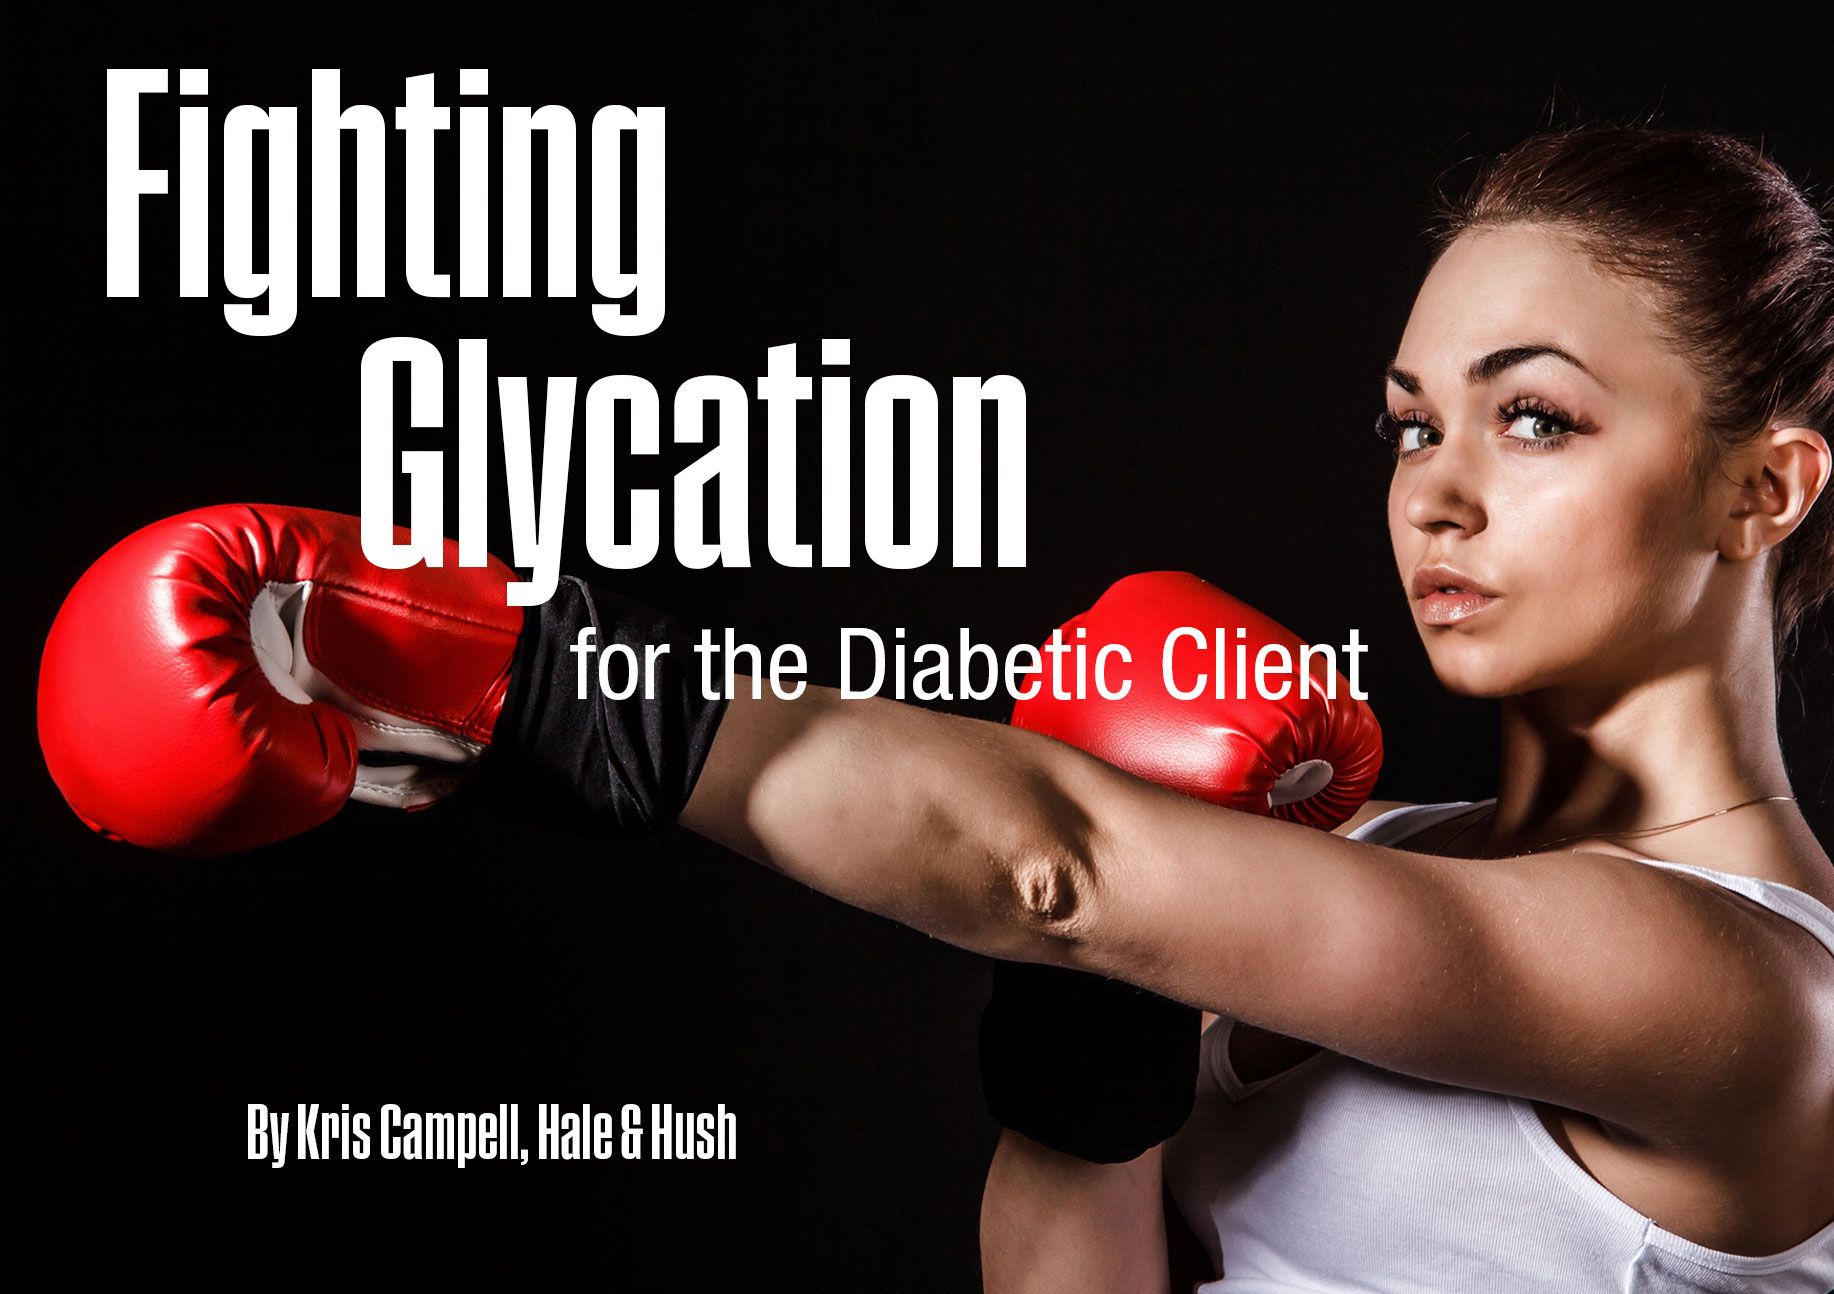 FightingGlycation_2